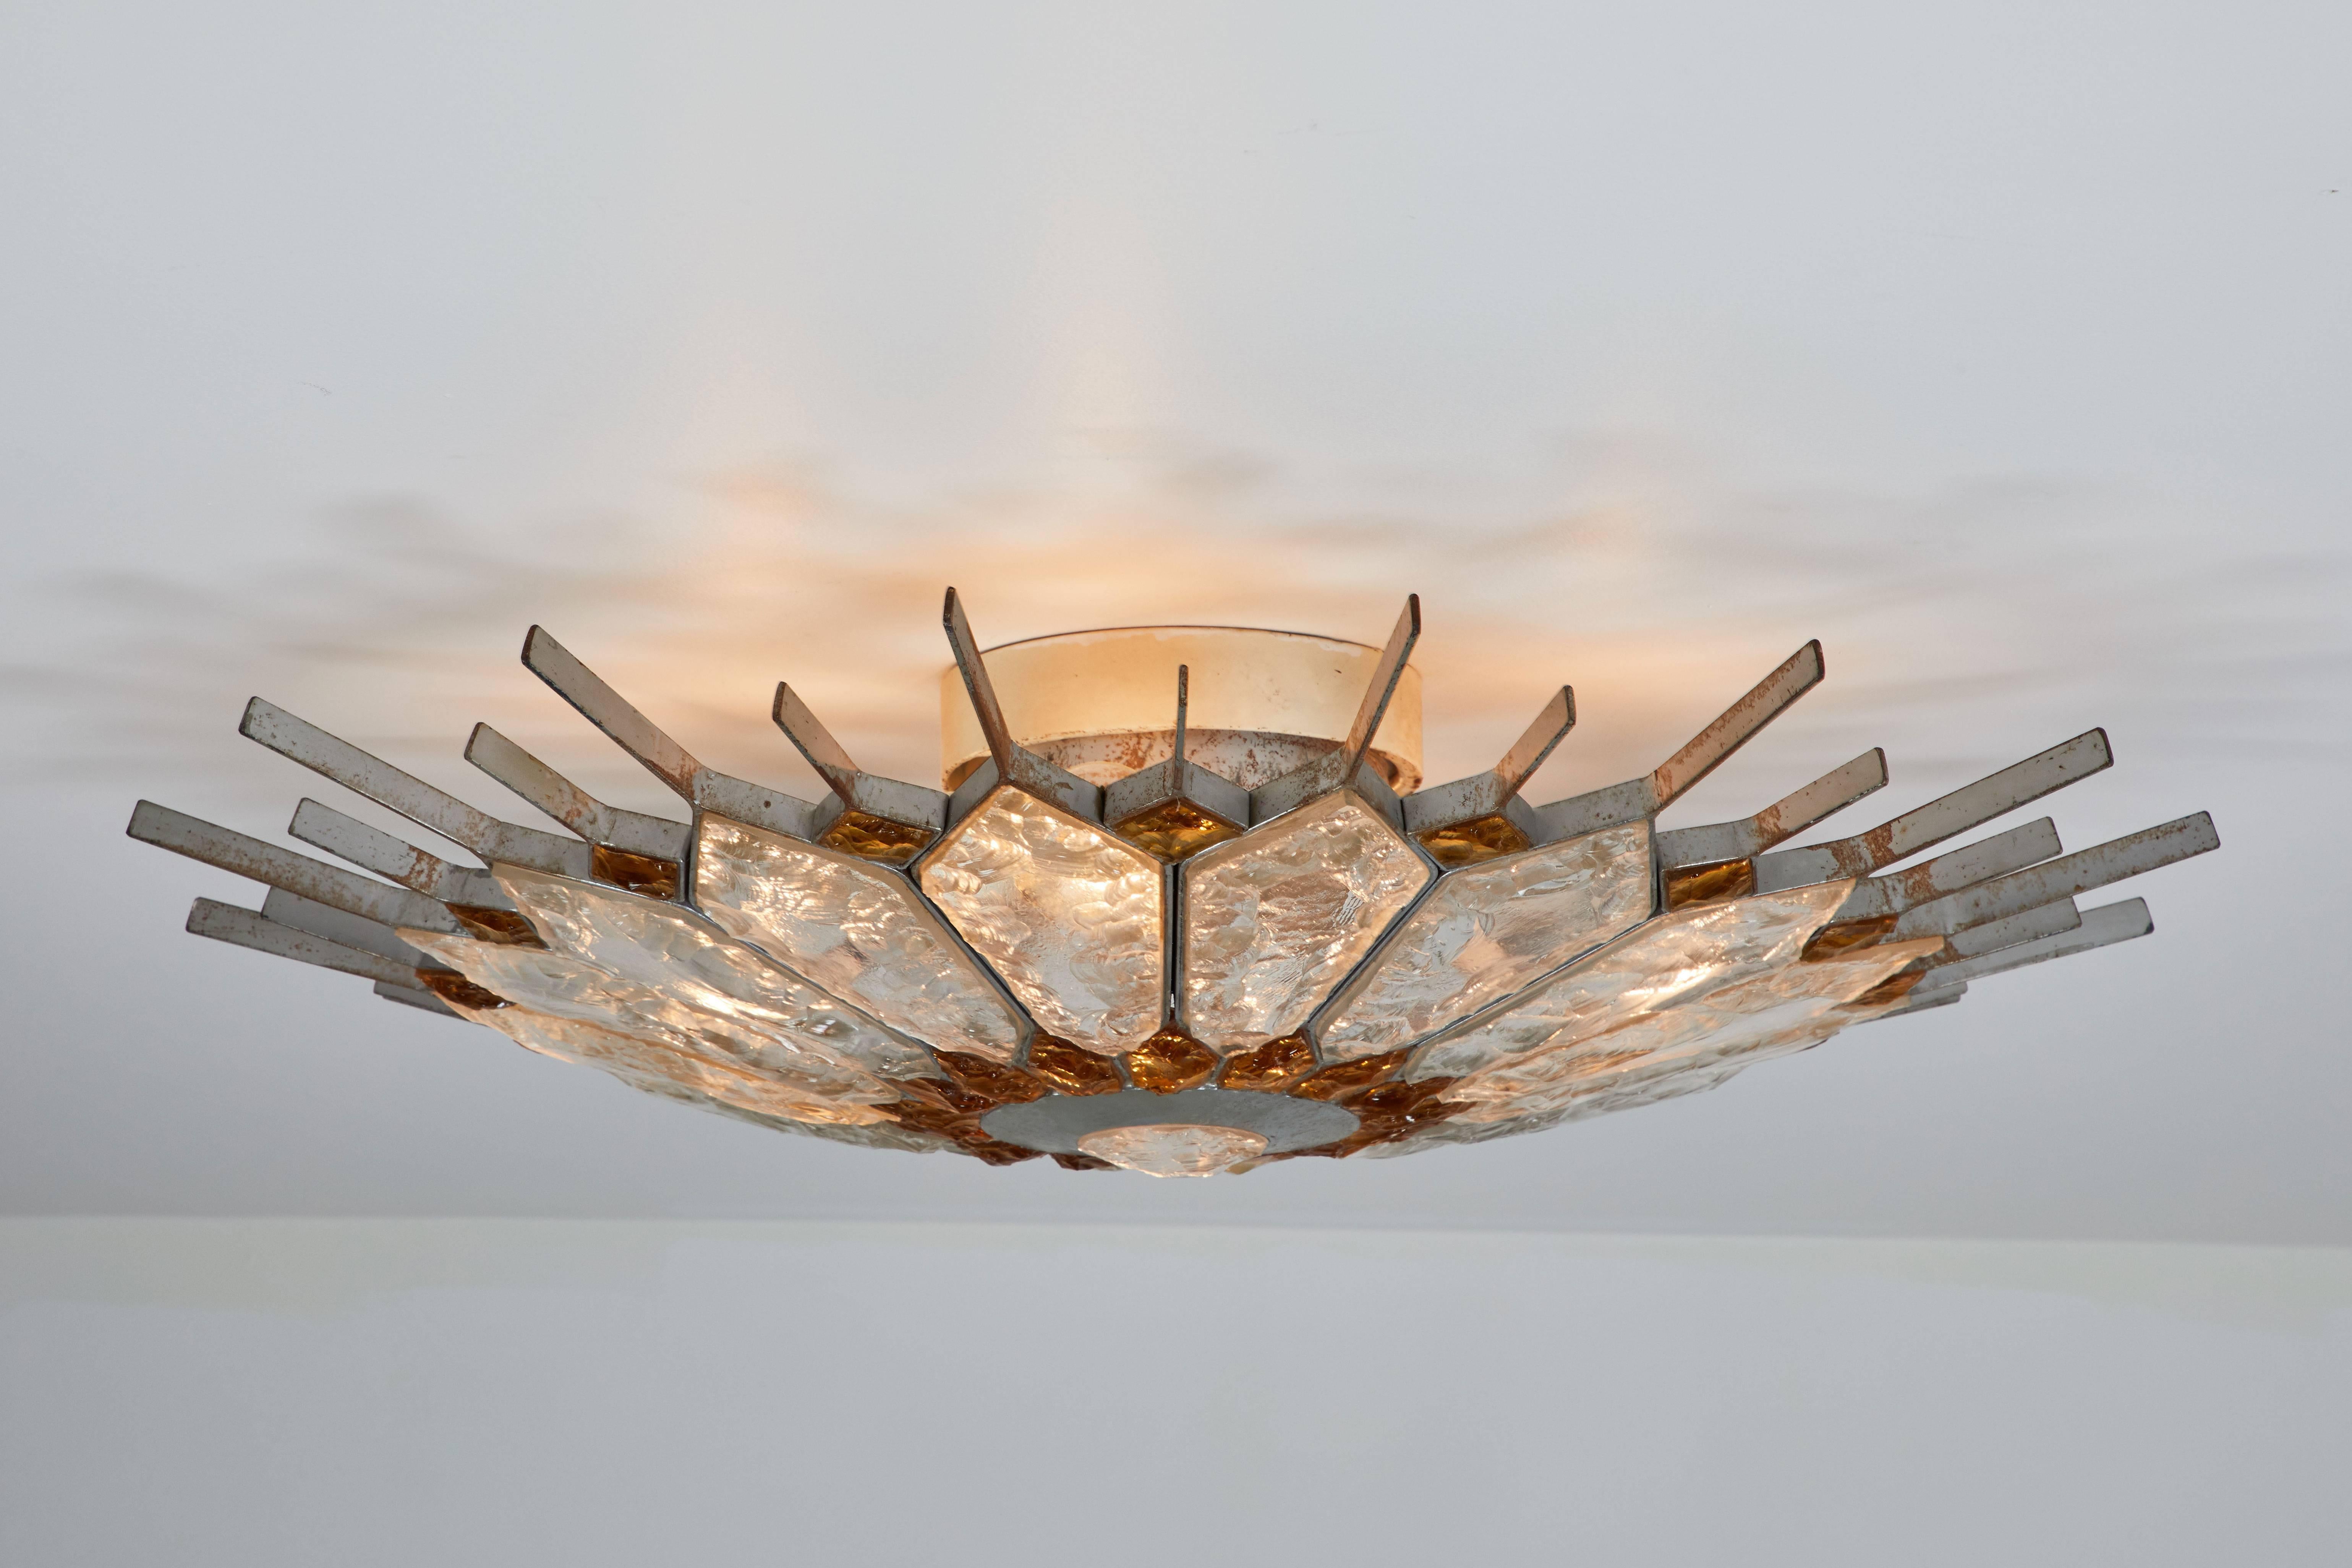 Flush mount ceiling light designed in the 1970s in Verona Italy by Longobard. Mosaic cut-glass with a chiseled surface and welded steel. Wired for US junction boxes. Takes four E27 60w maximum bulbs
